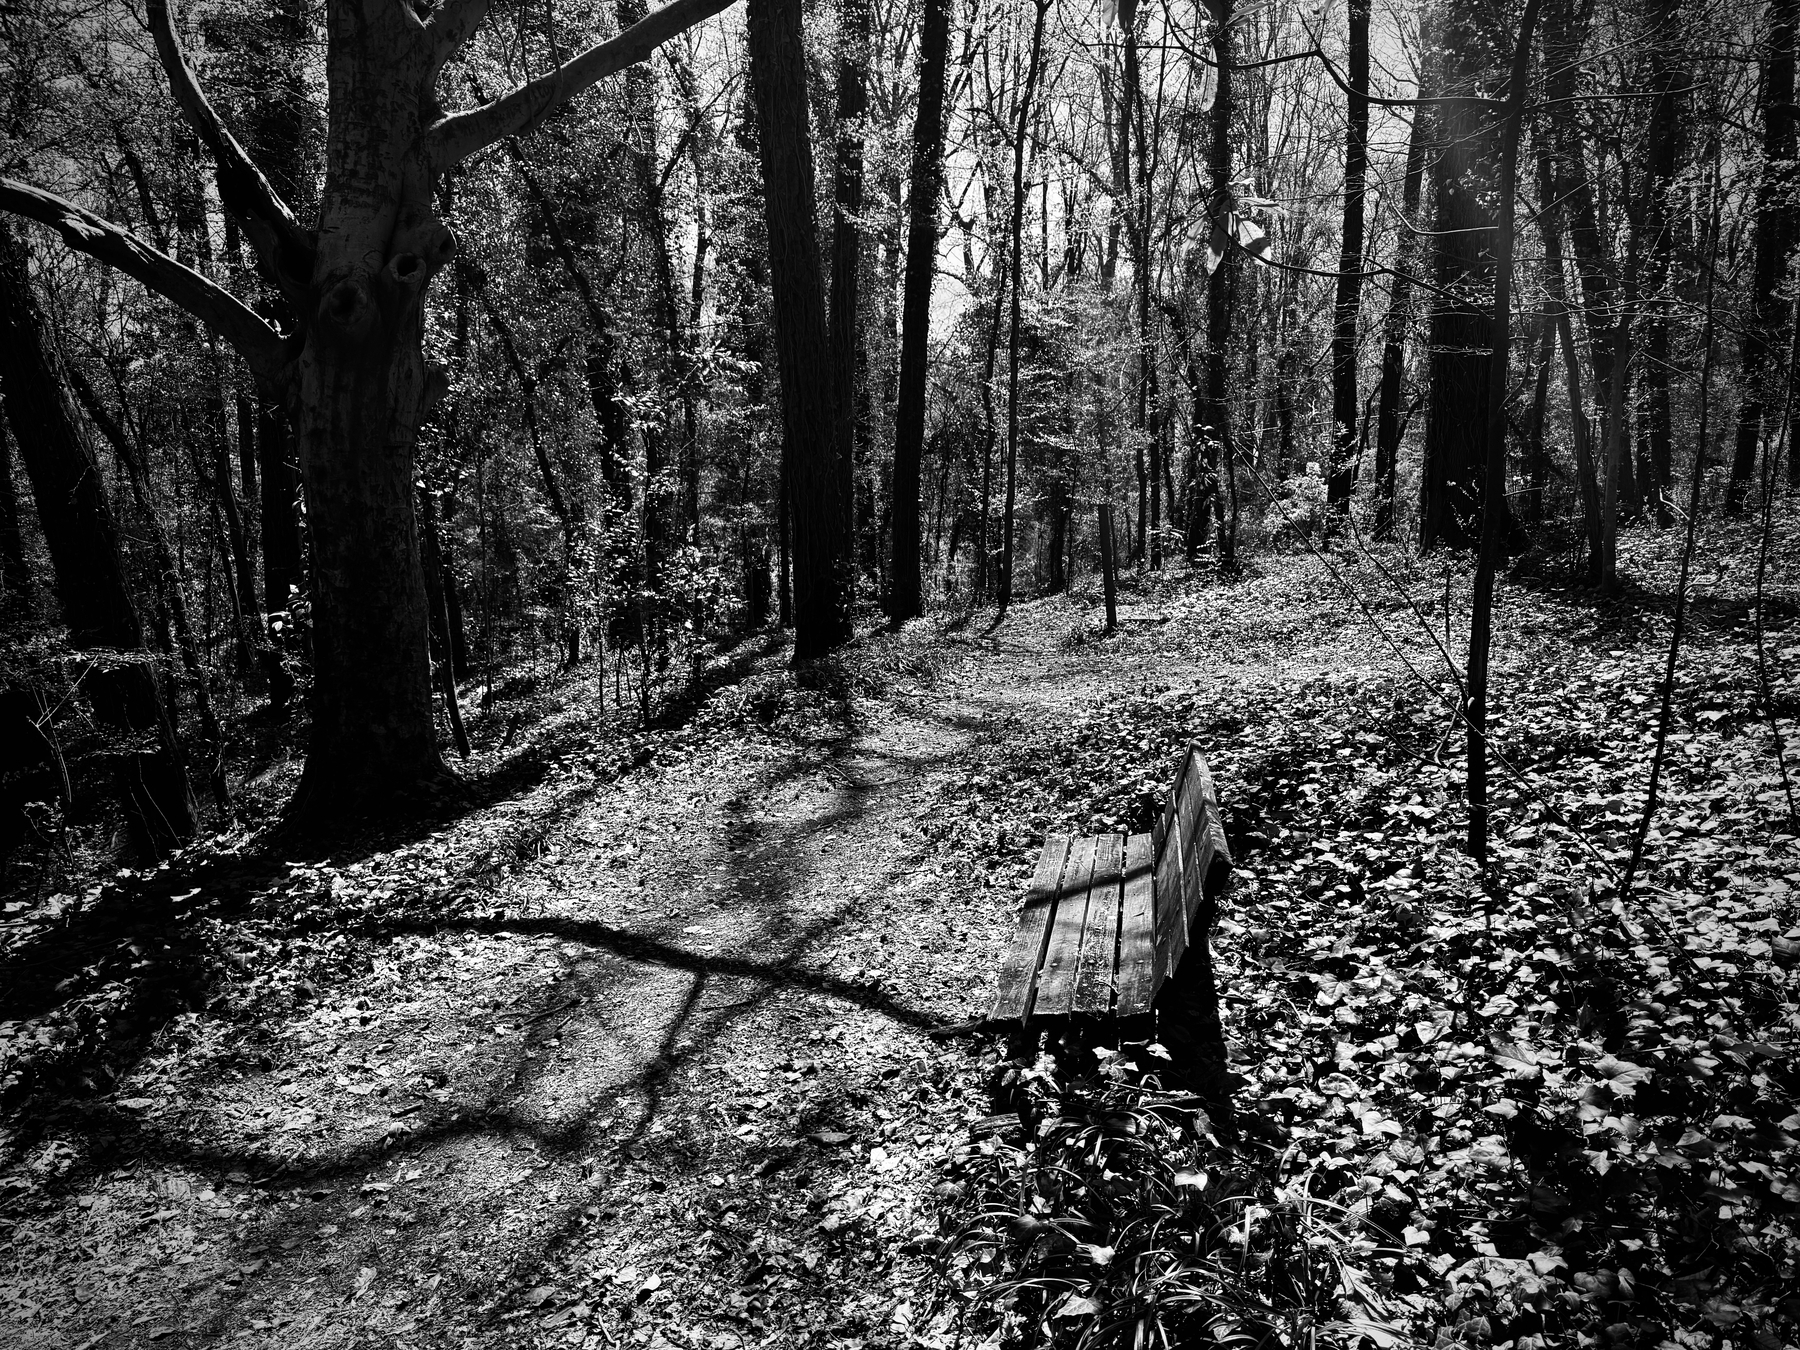 A black and white photo of a forest with leaf-covered ground, a wooden bench on the right, and trees casting shadows across a trail.